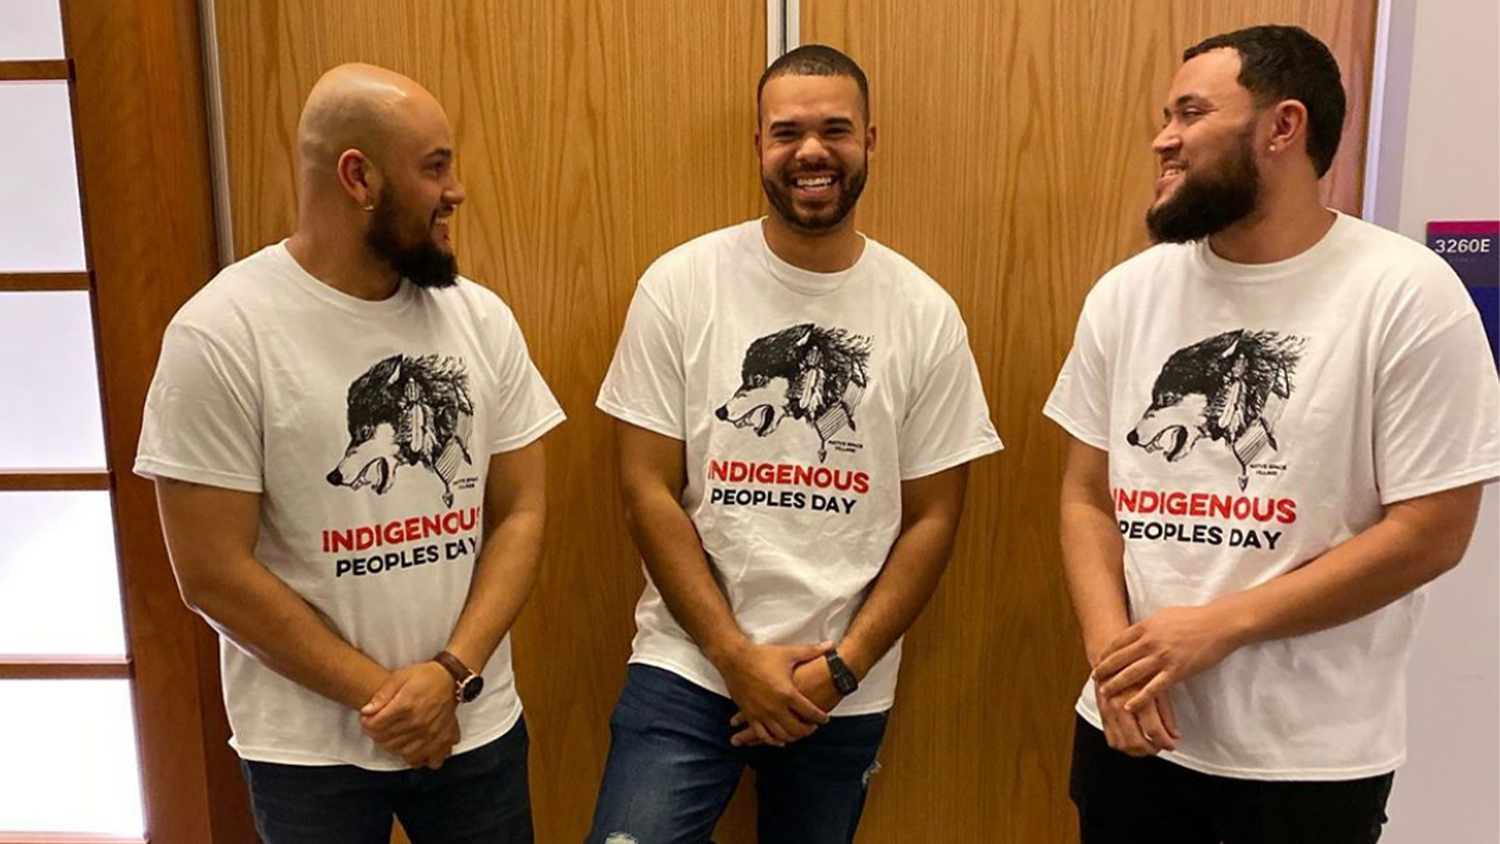 Three members of Native Space wearing Indigenous People's Day T-shirts